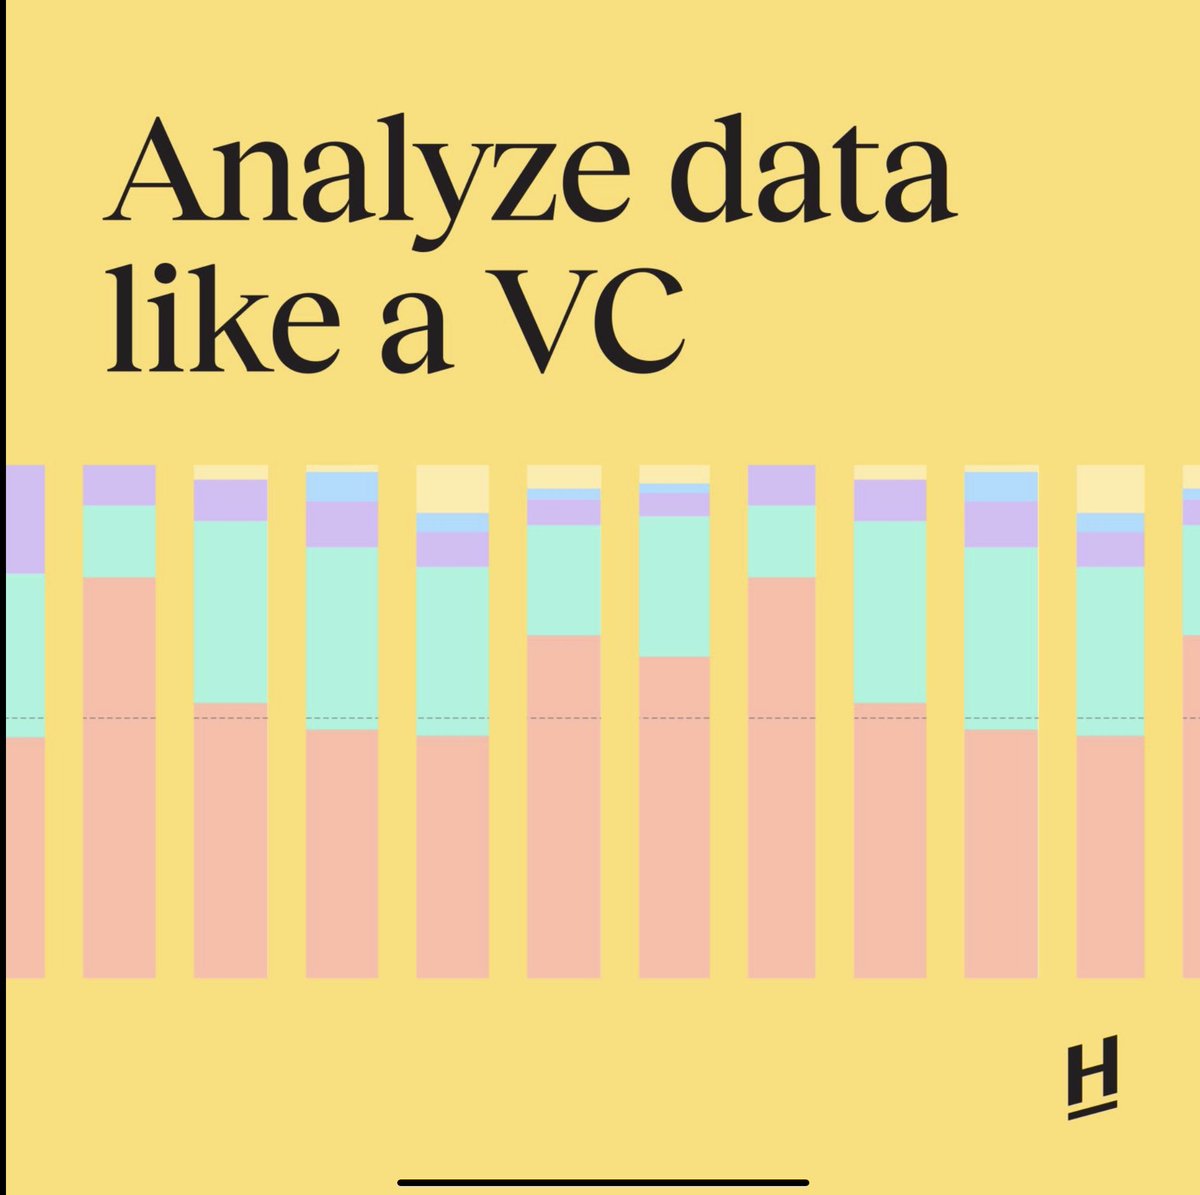 Analyze data like a VC! For almost 15 years we @HeadlineVC have been coding our very own software tools to analyze startups. Today we are thrilled to make part of our software available to everyone! Try it for yourself and analyze your own data like a VC would. Of course all…